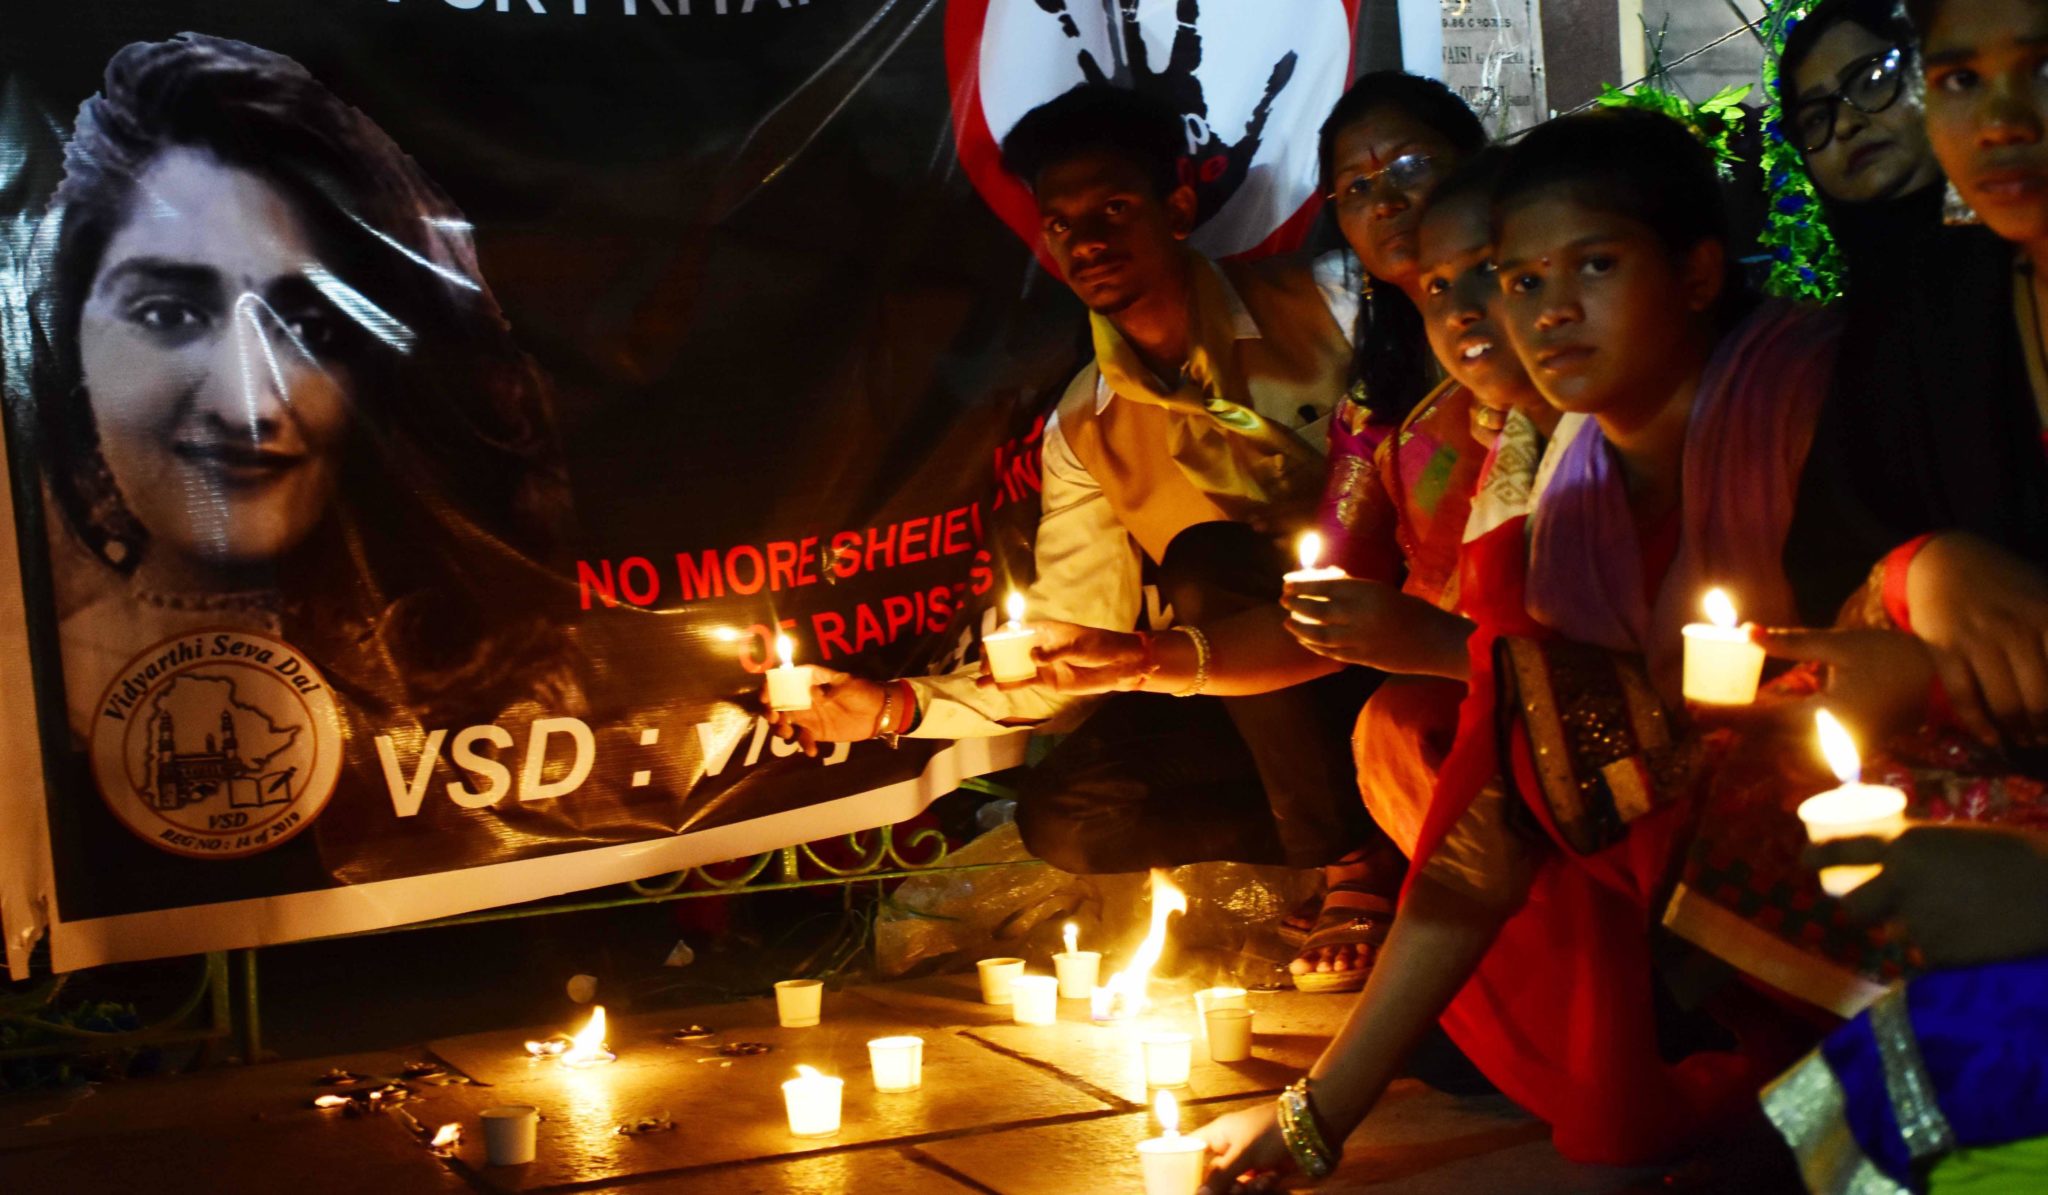 HYDERABAD, NOV 30 (UNI) : VSD Students & women Paying Tributes In Front of Candle Light In Front of ( Vidyarthi Seva Dal ) Organized Candle Light Program, for Justice Brutal Rape and Murder of Veterinary Dr Priyanka Reddy, in Hyderabad on Saturday. UNI PHOTO RAO19U